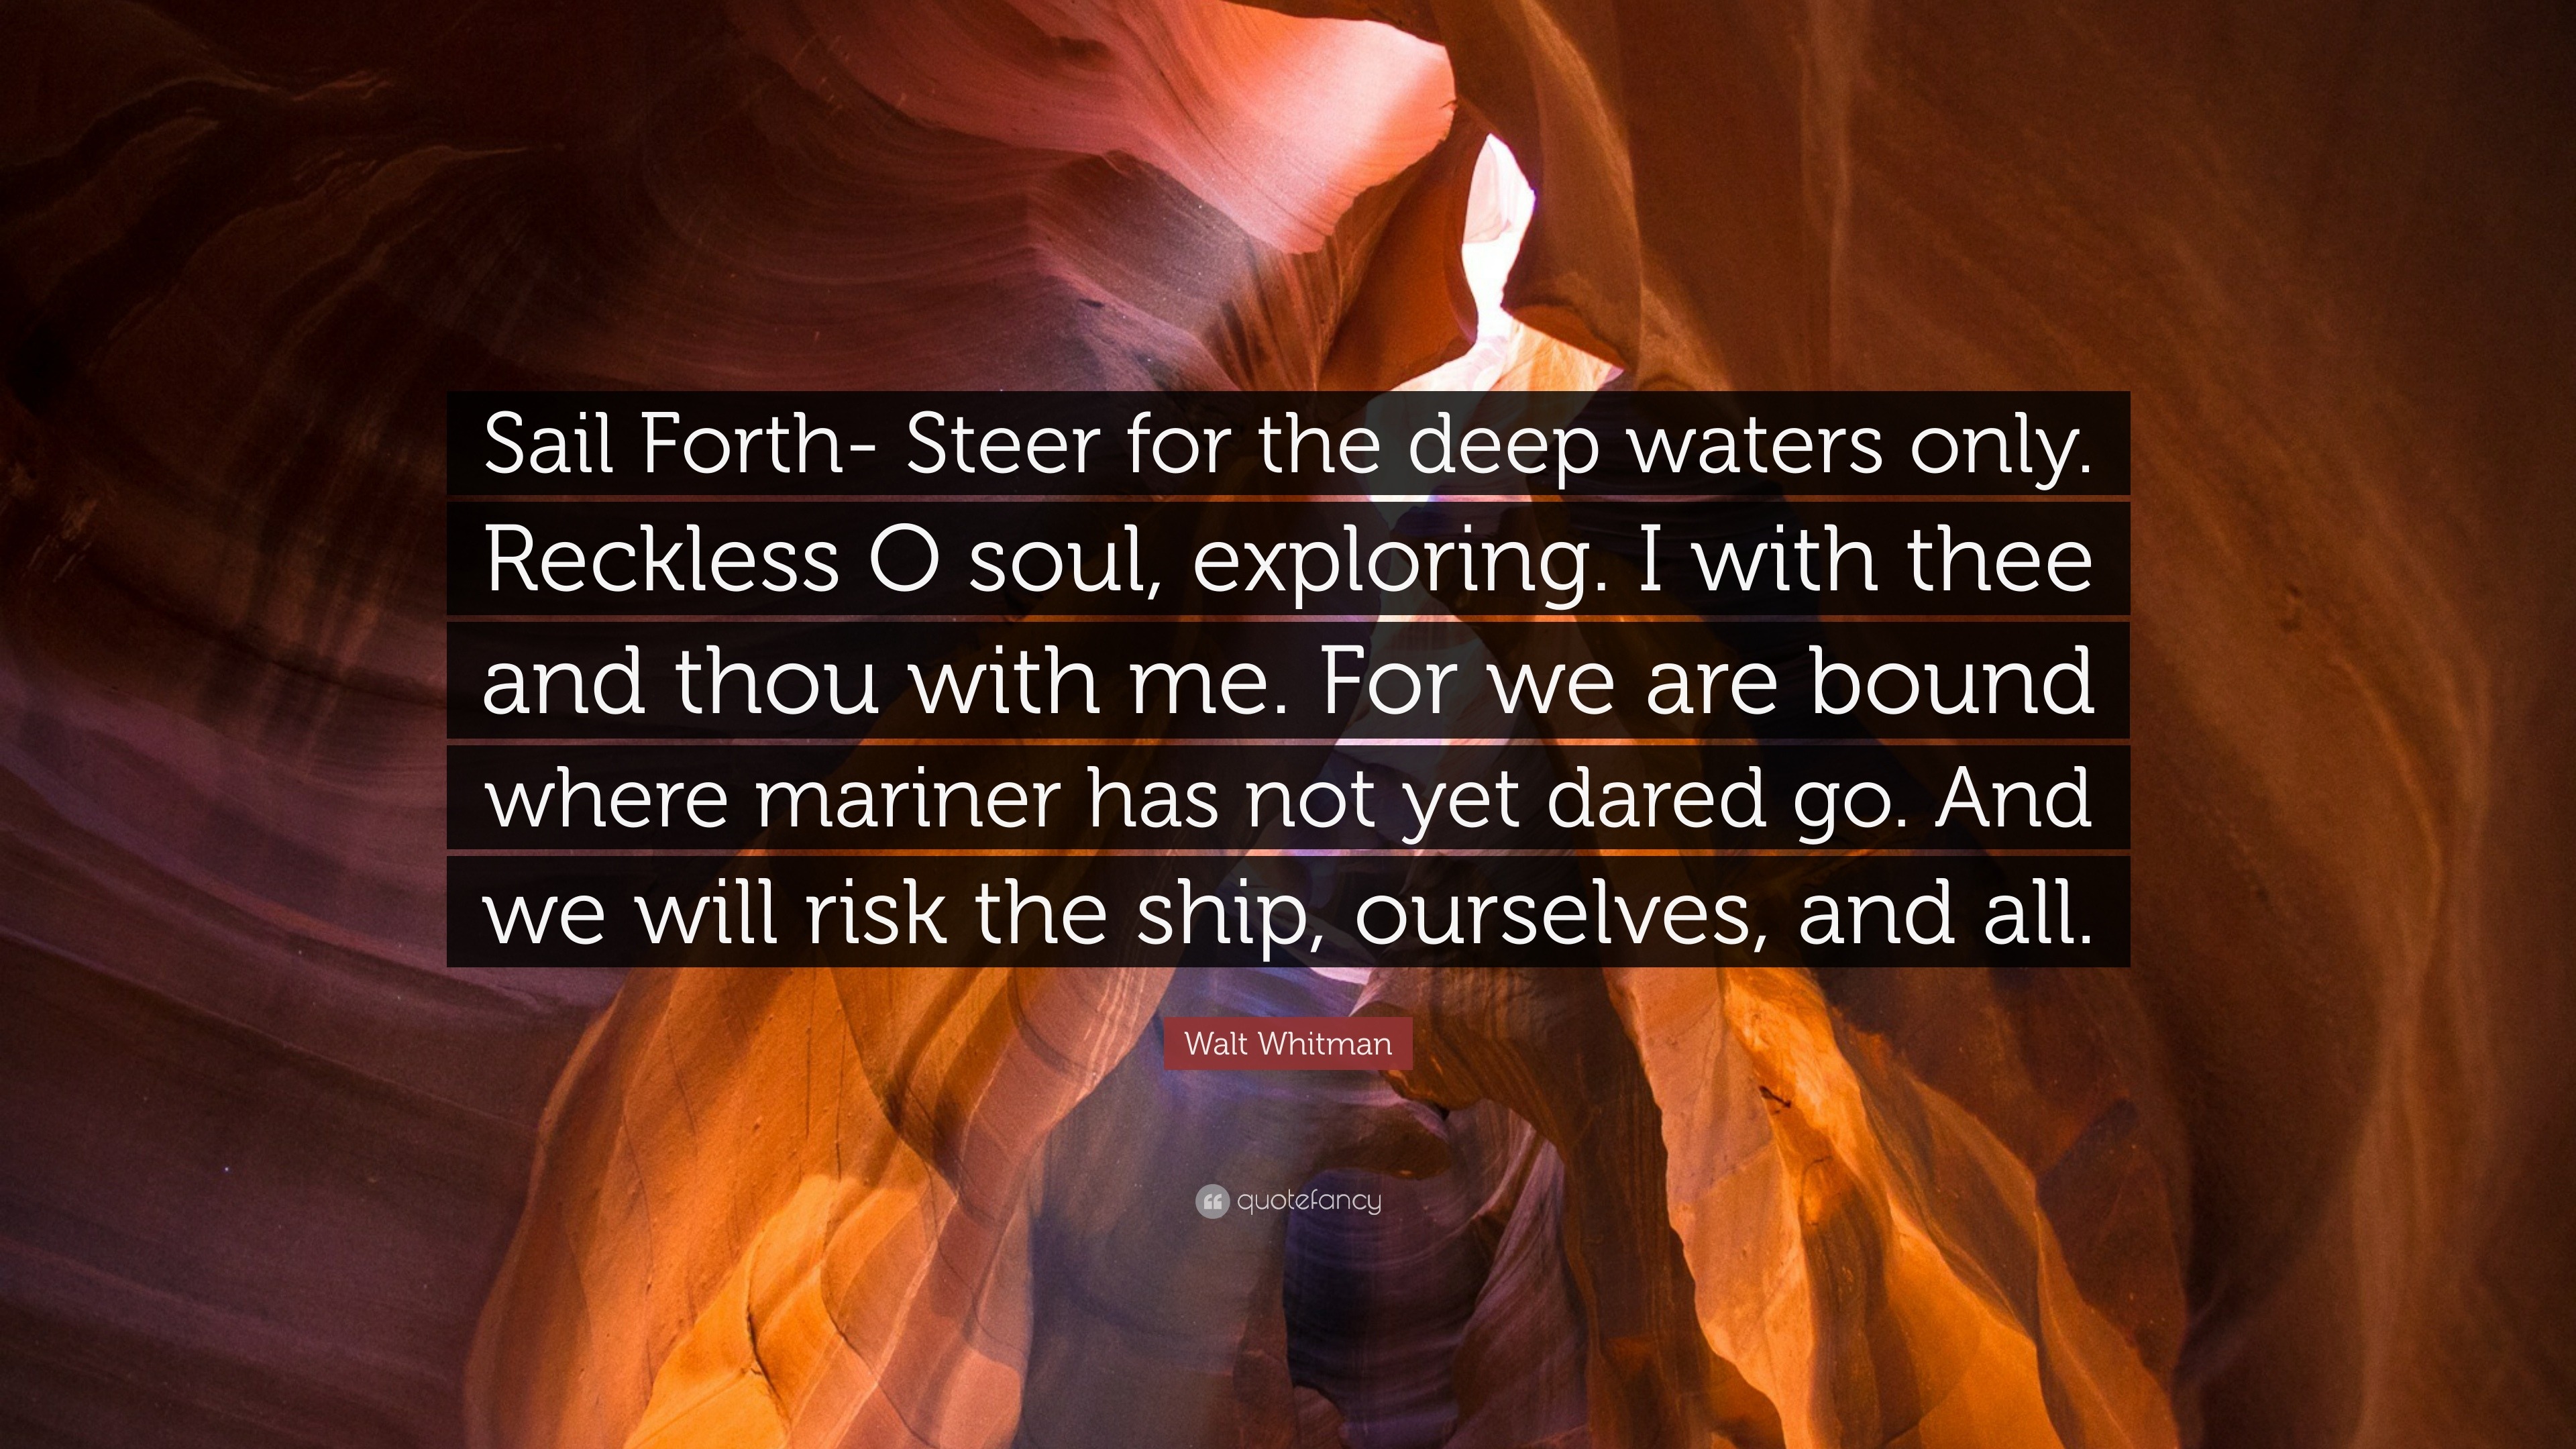 sail forth steer for the deep waters only